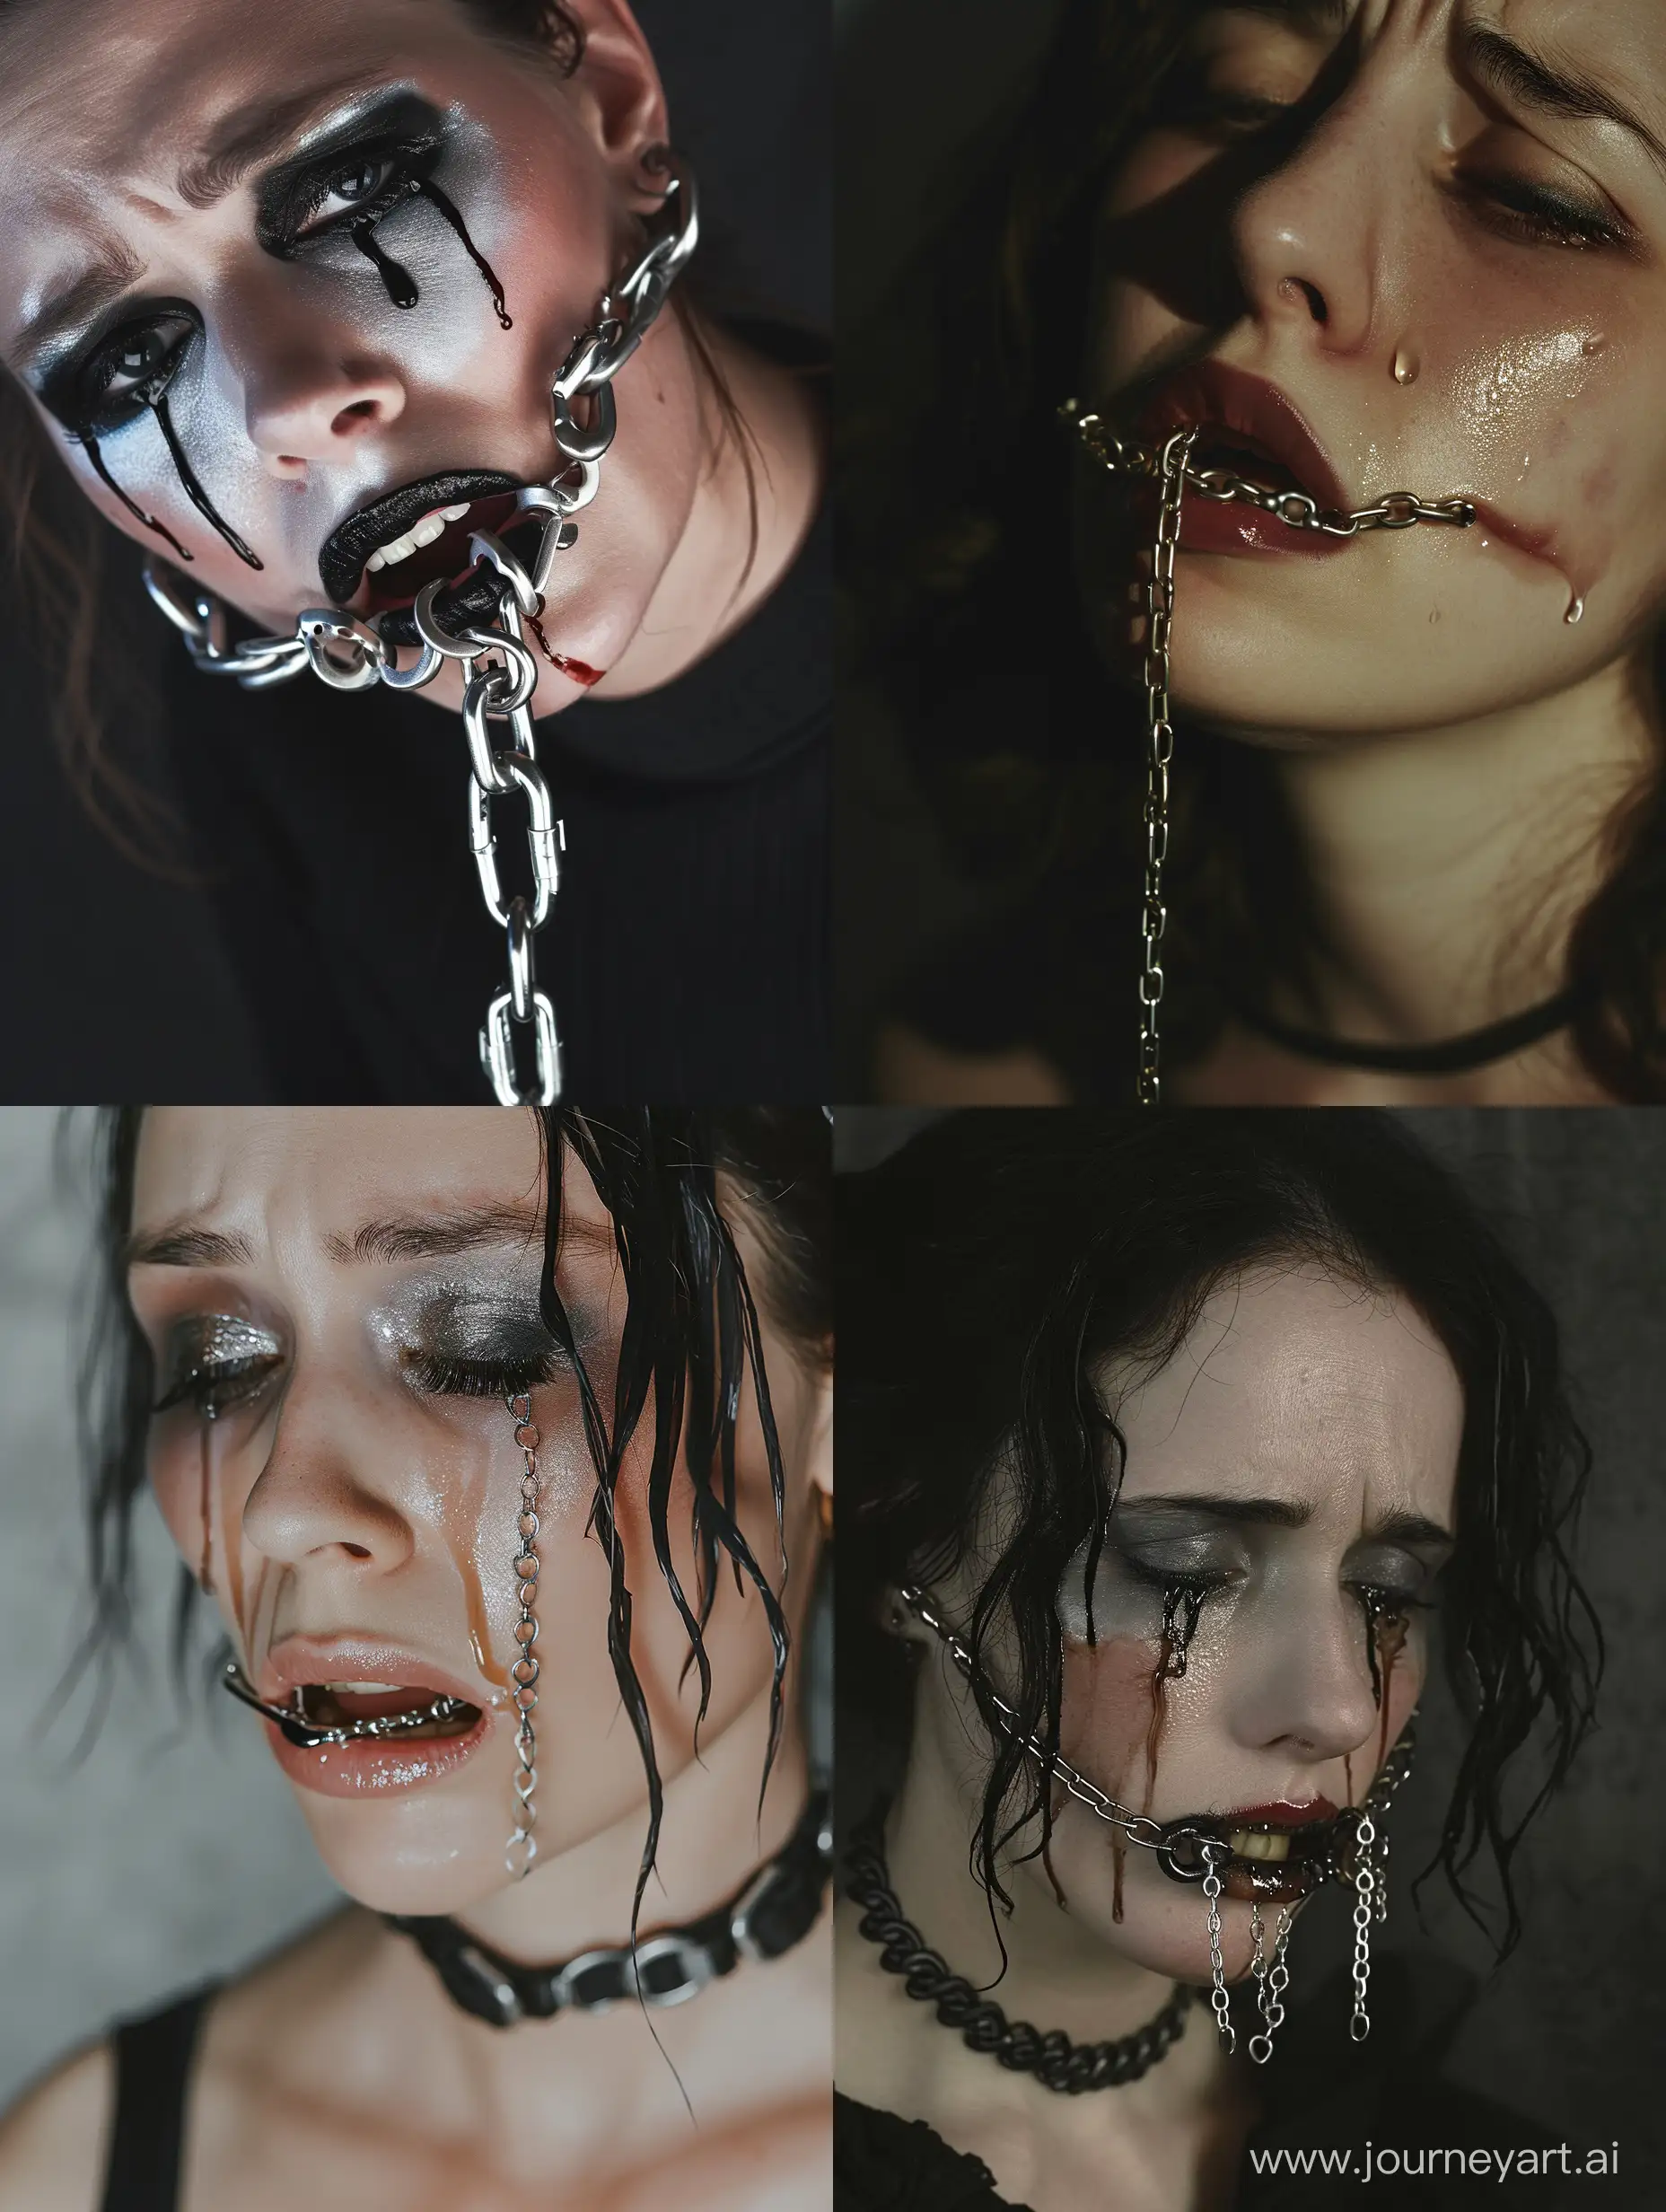 Emotional-Portrait-Woman-Wearing-Jennings-Mouth-Chain-with-Faint-Makeup-and-TearStained-Face-by-Catherine-Opie